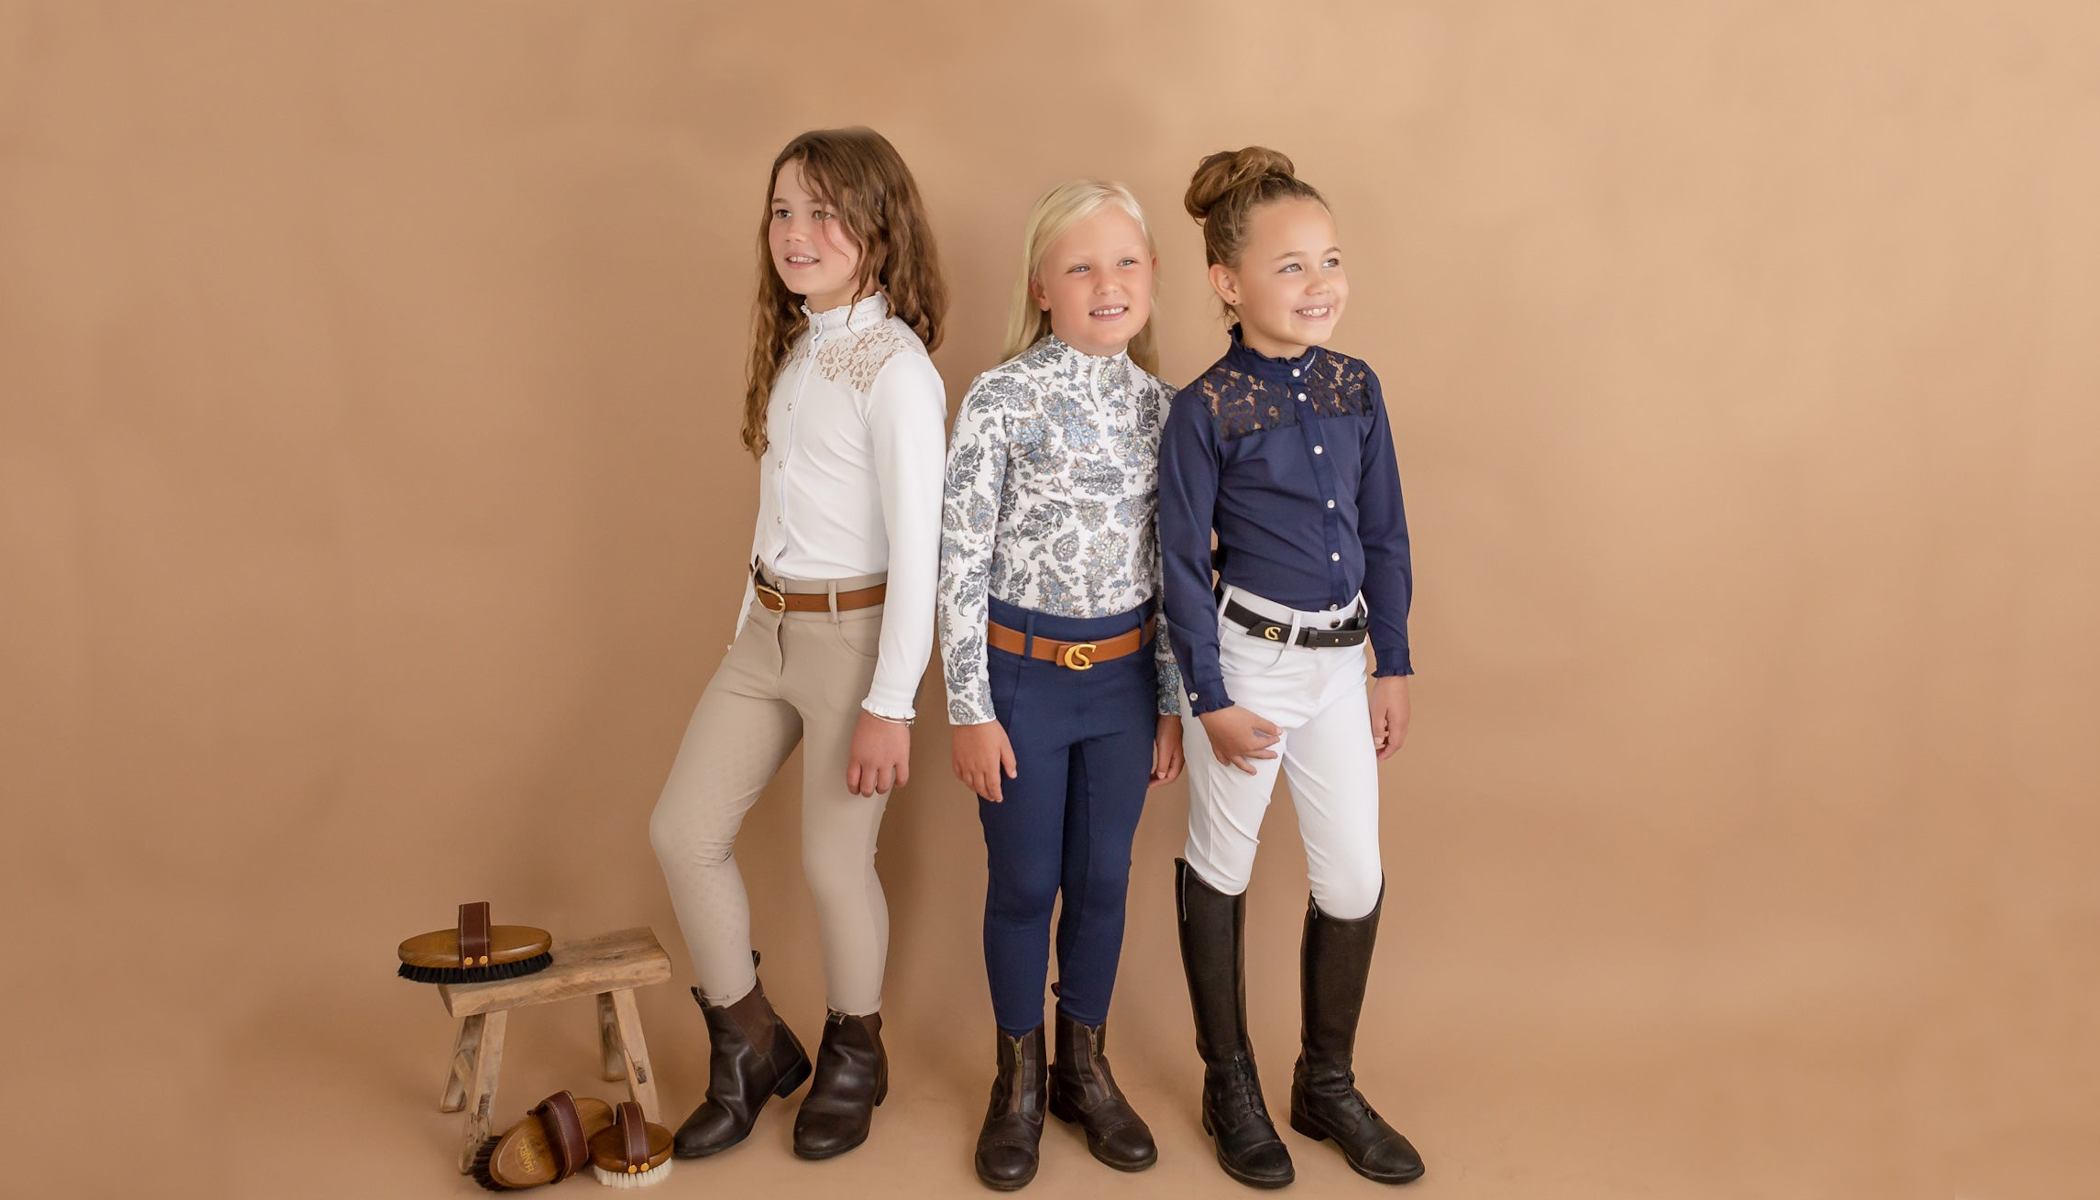 Equestrian Clothing, Apparel & Outfits